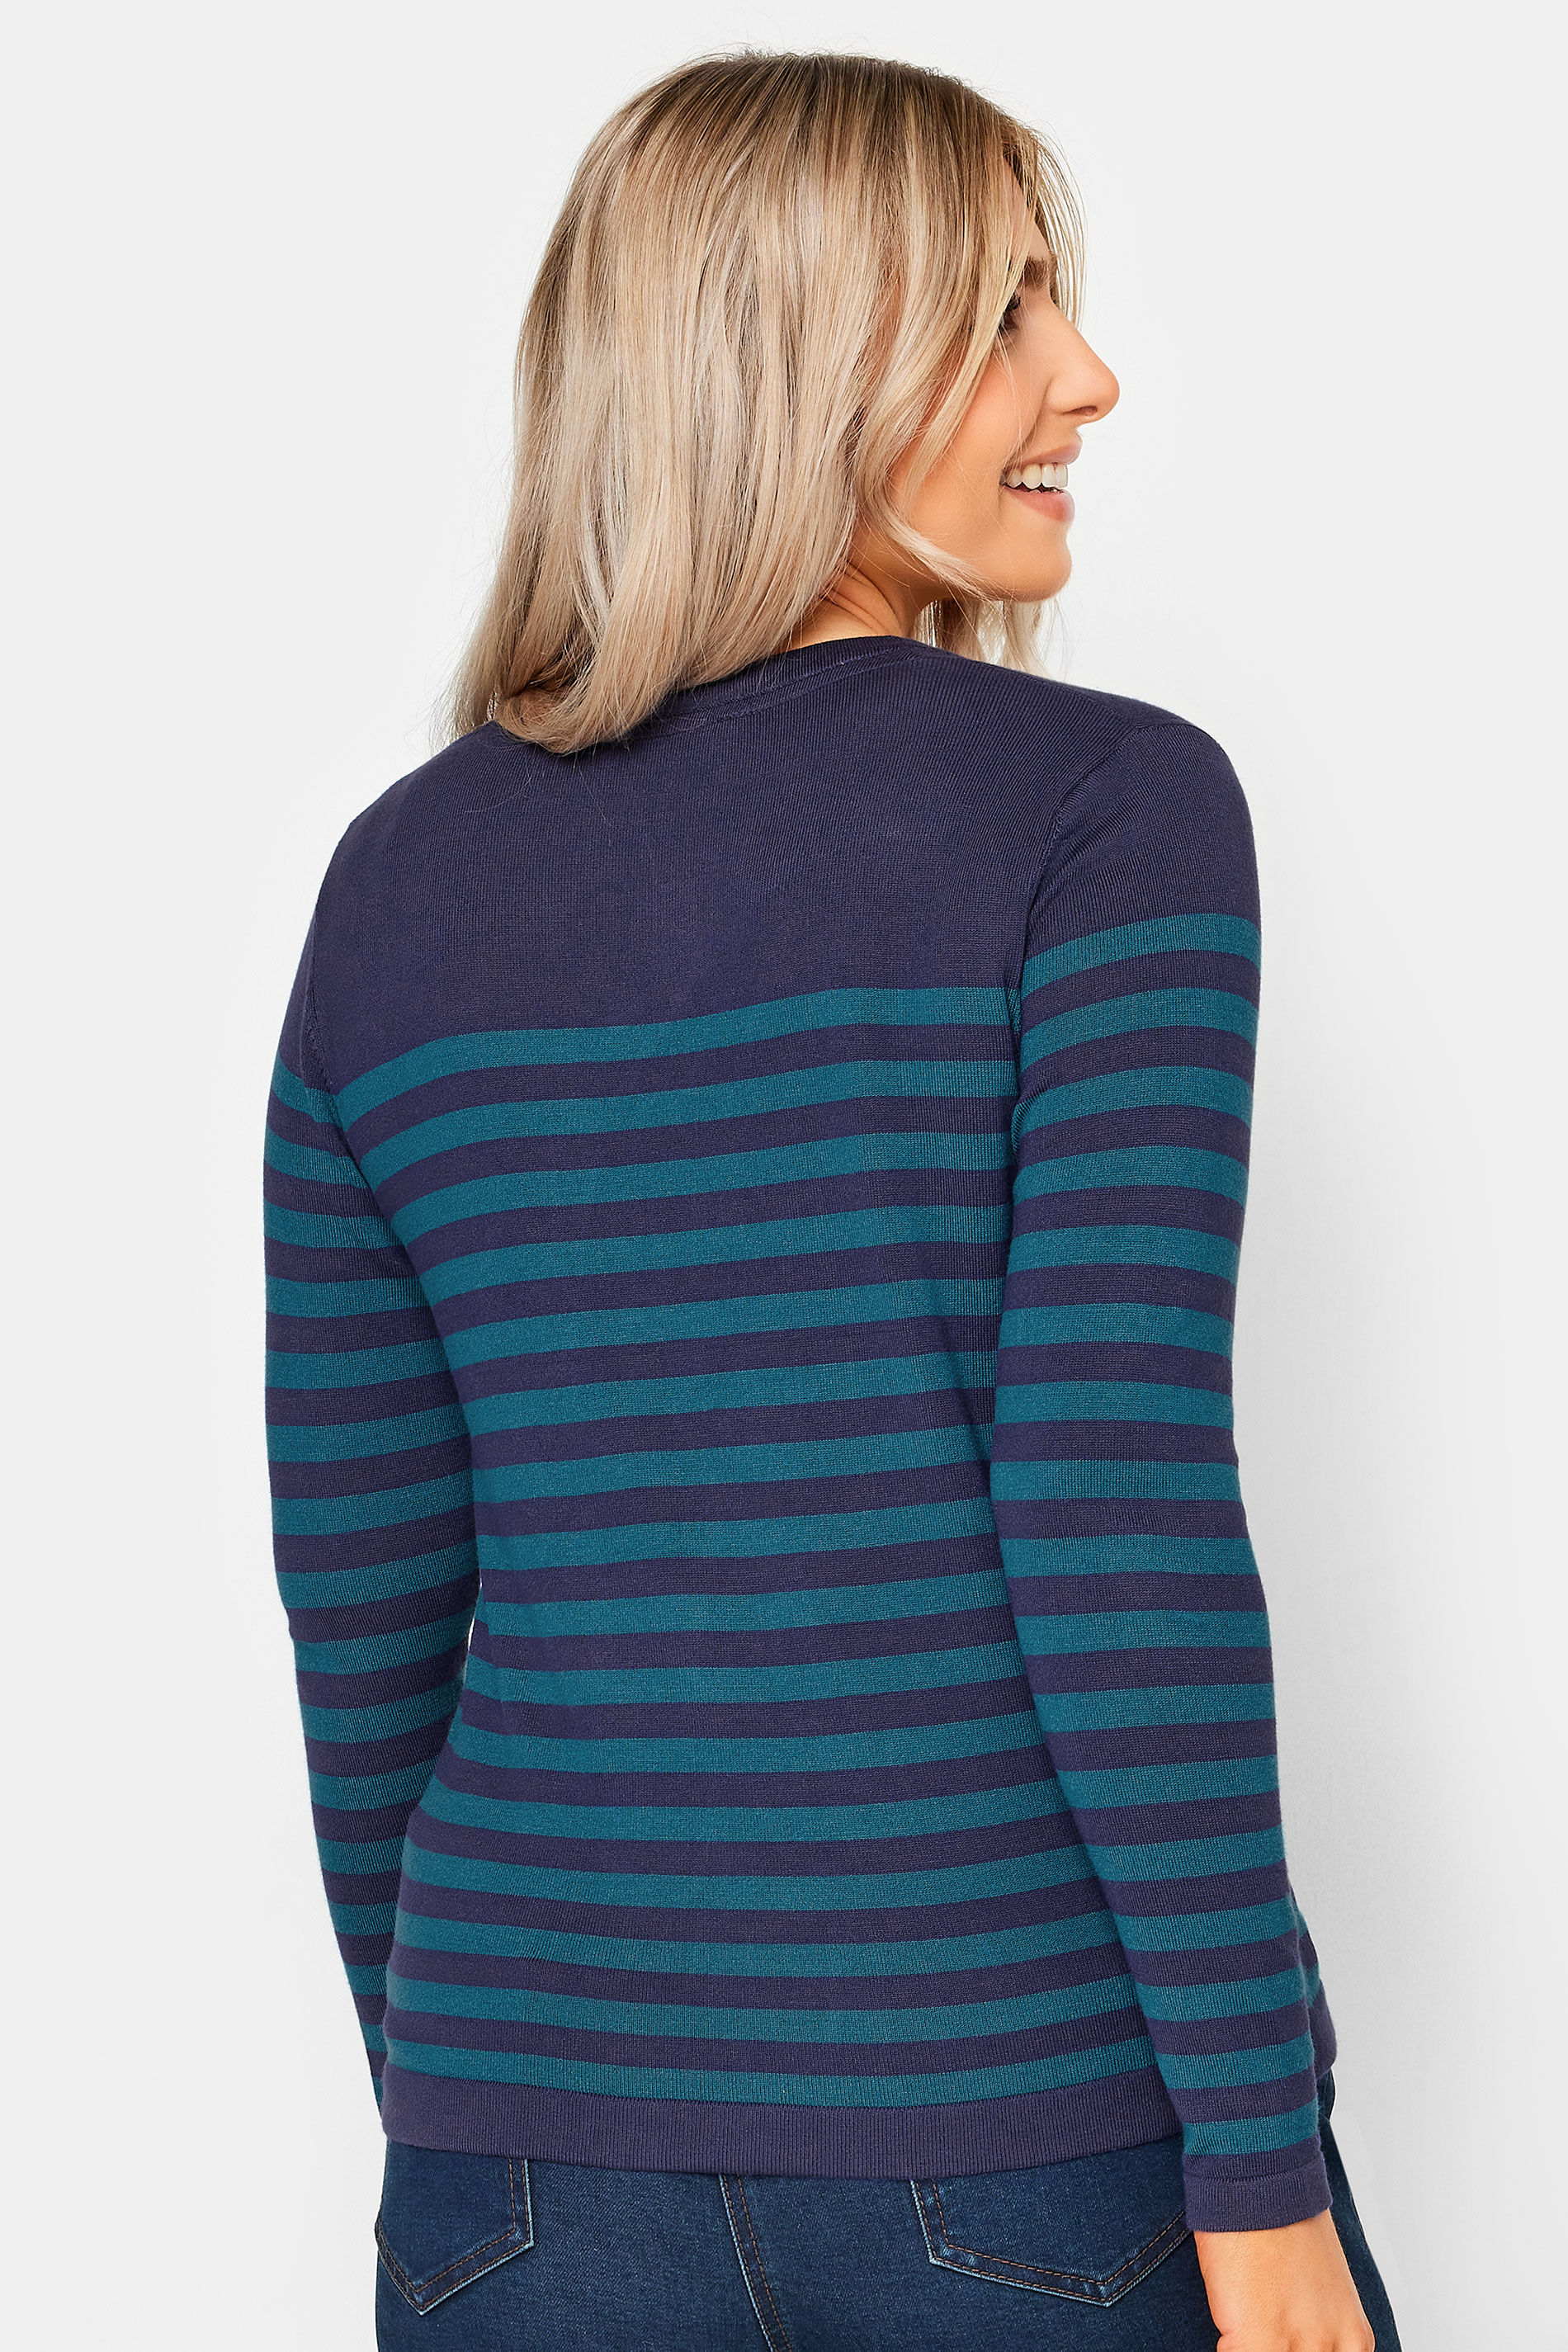 M&Co Petite Navy Blue Stripe Knitted Jumper | M&Co 3